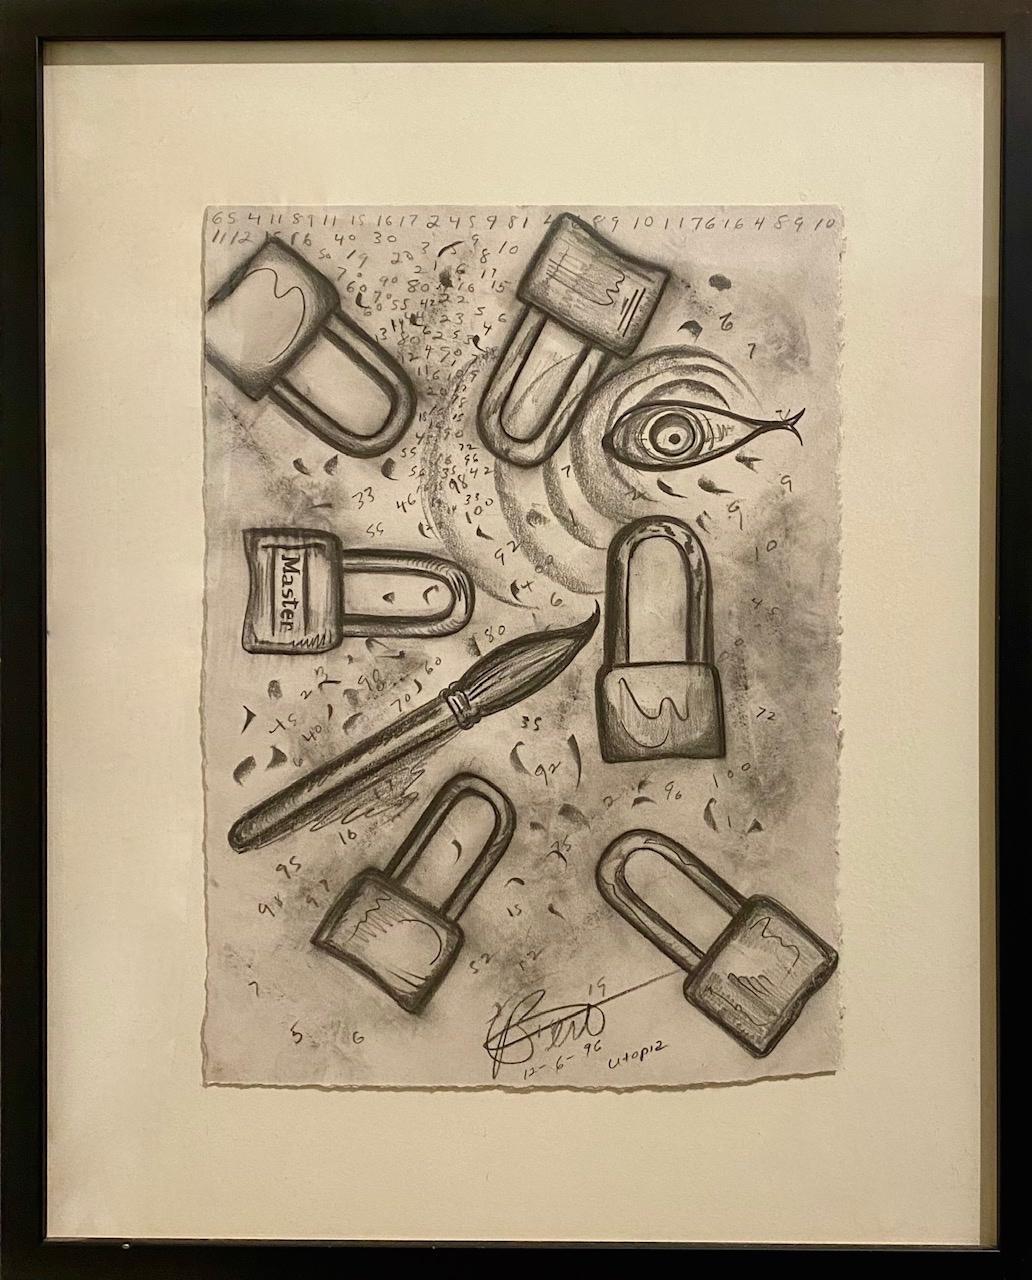 Bert L. Long, Jr. Abstract Drawing - "Master (Utopia), " Charcoal drawing on Paper, Folk Art, Signed in Black Frame